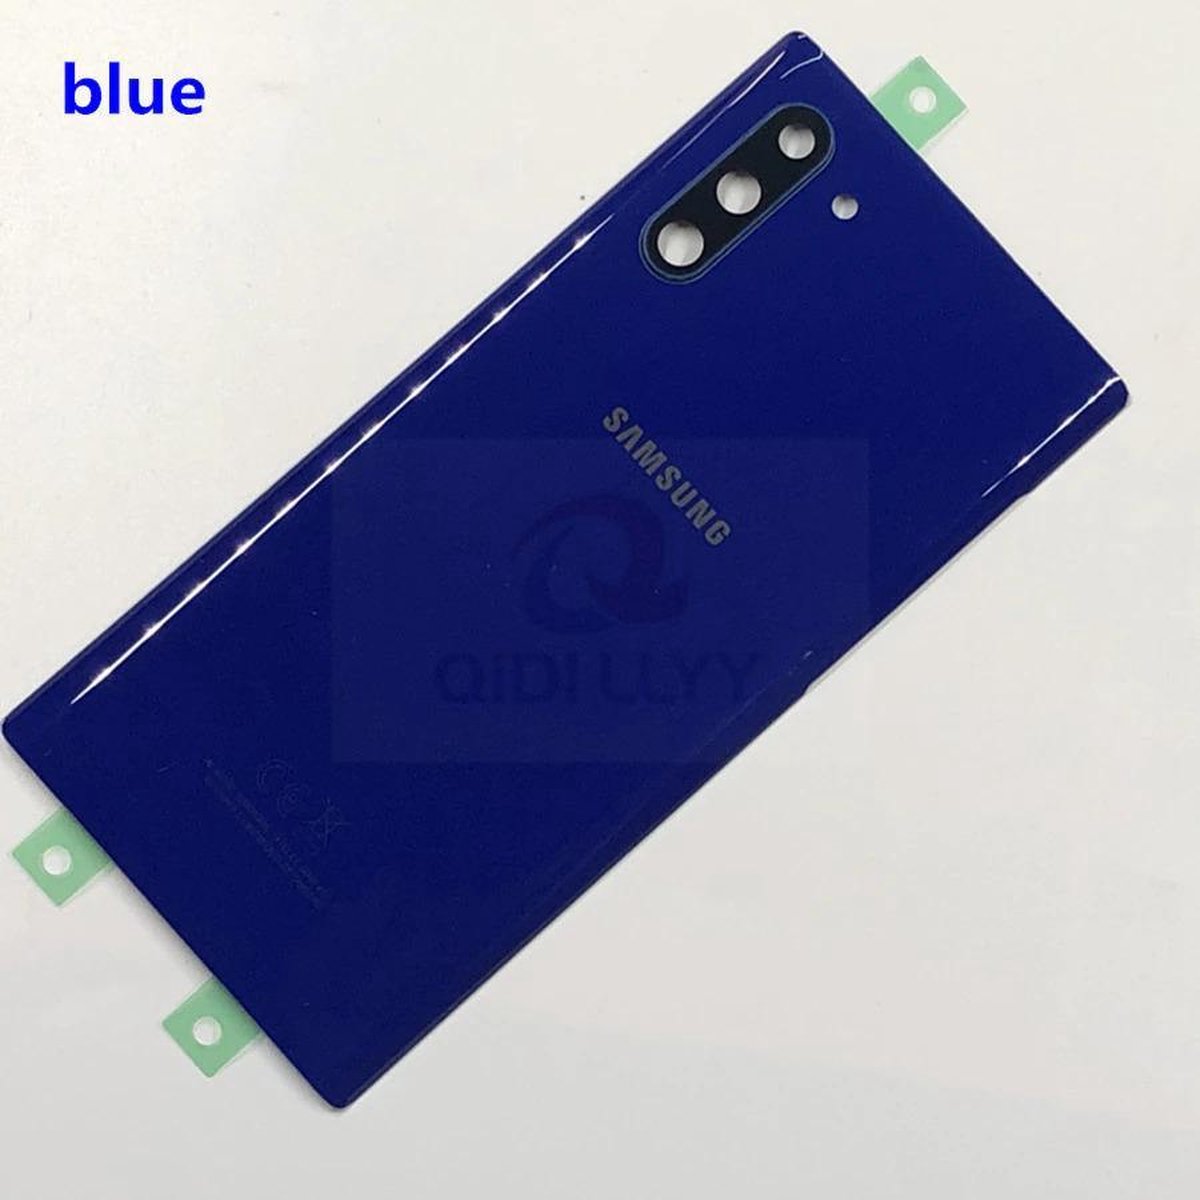 Samsung Galaxy Note 10 N970F - battery cover / back cover/ achterkant - blauw